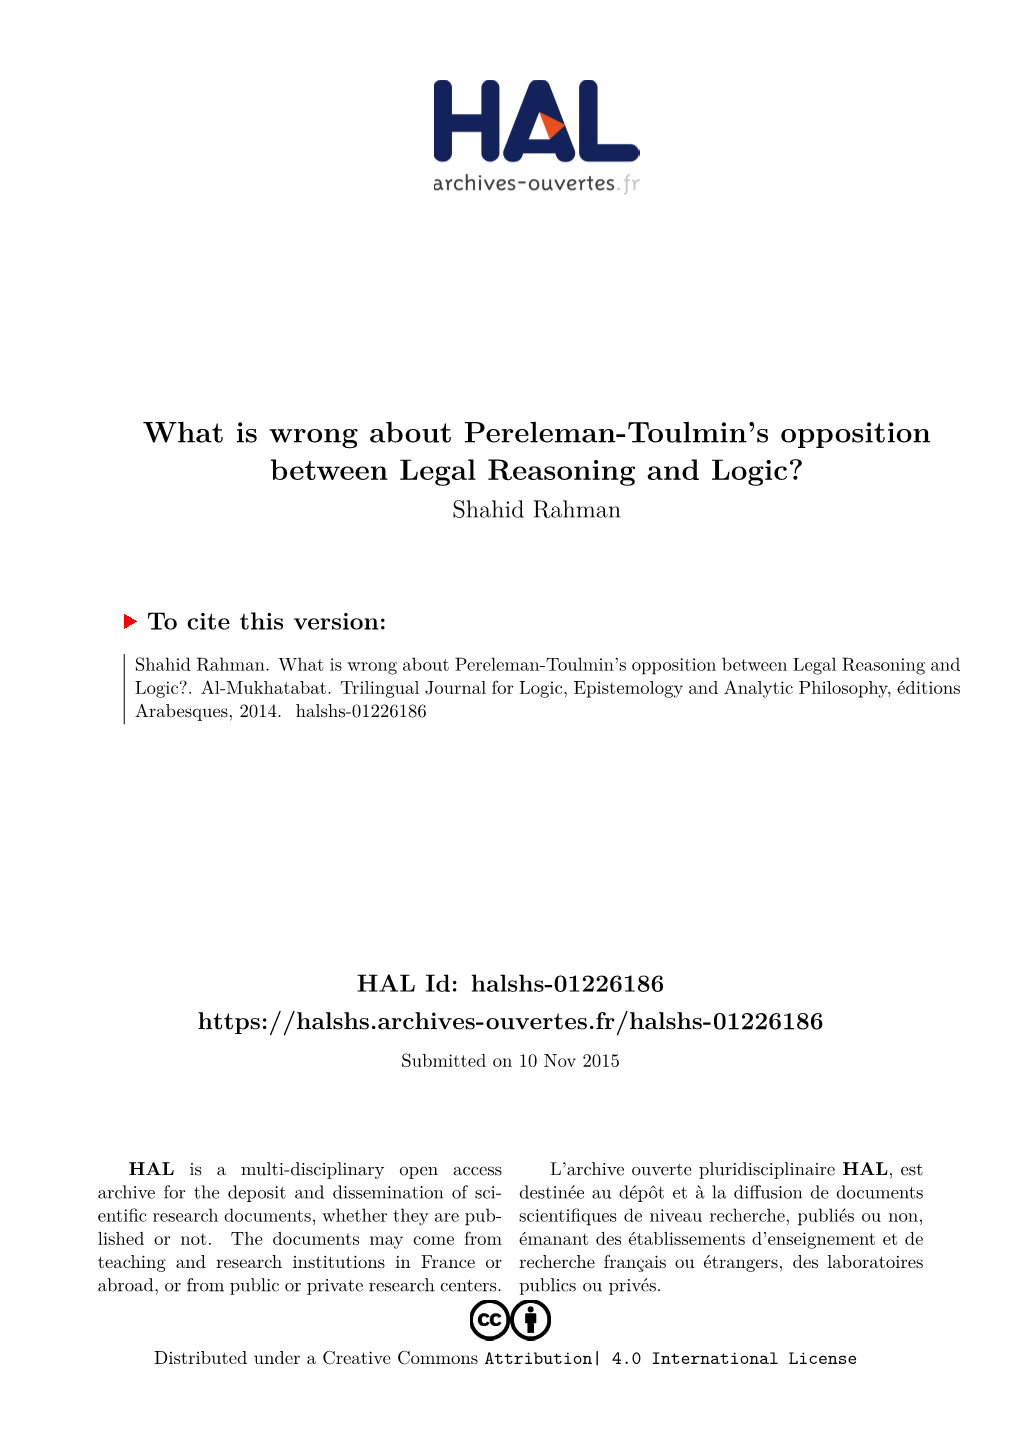 What Is Wrong About Pereleman-Toulmin's Opposition Between Legal Reasoning and Logic?